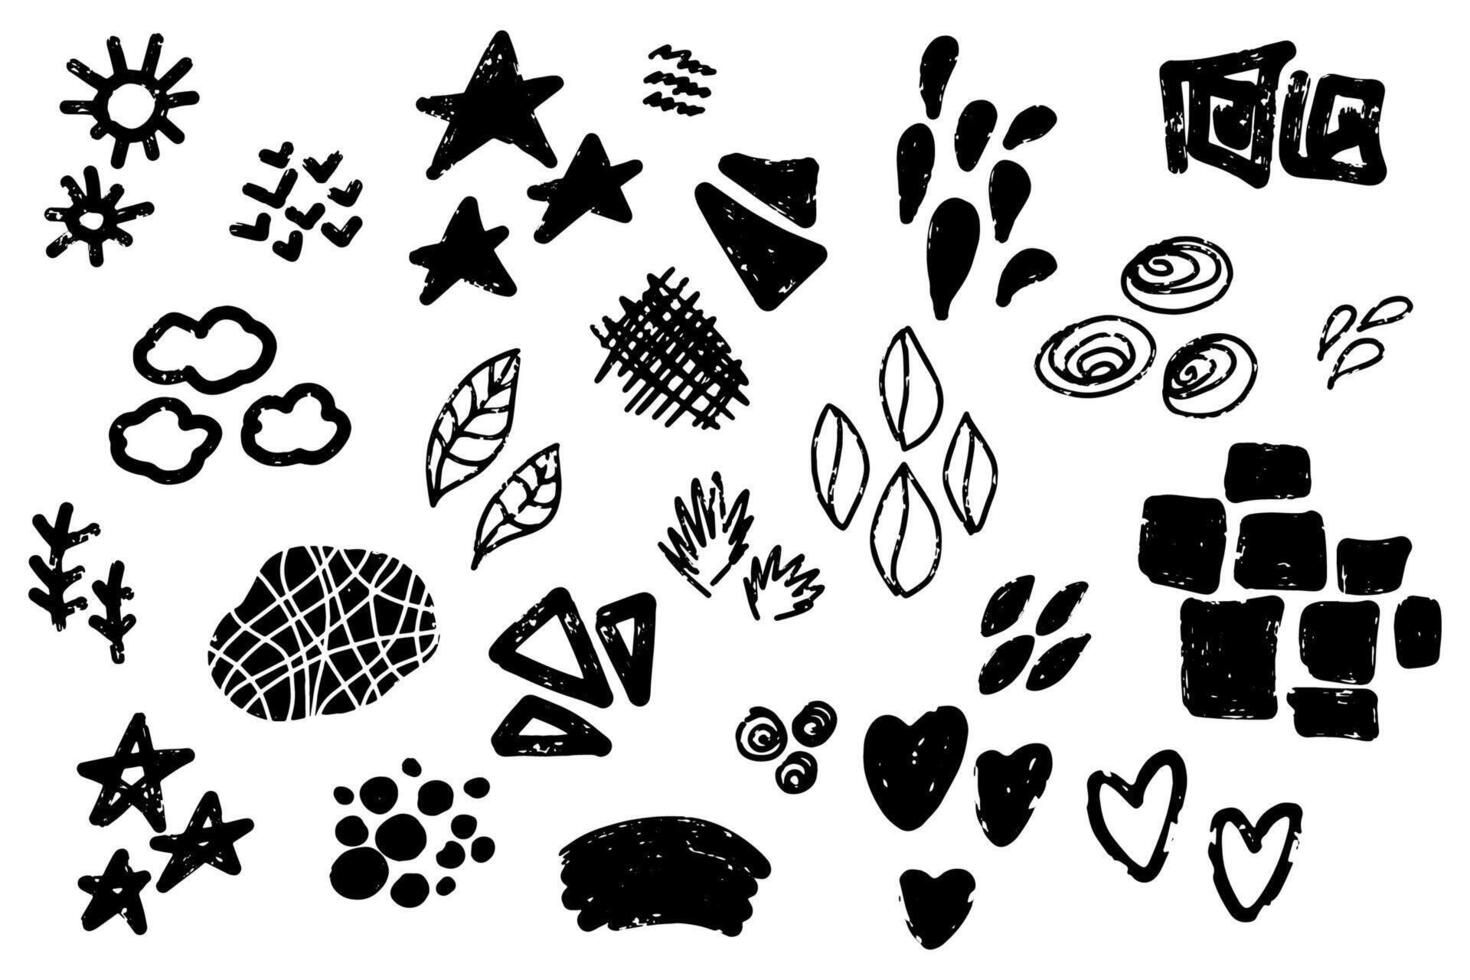 a black and white drawing of various shapes vector